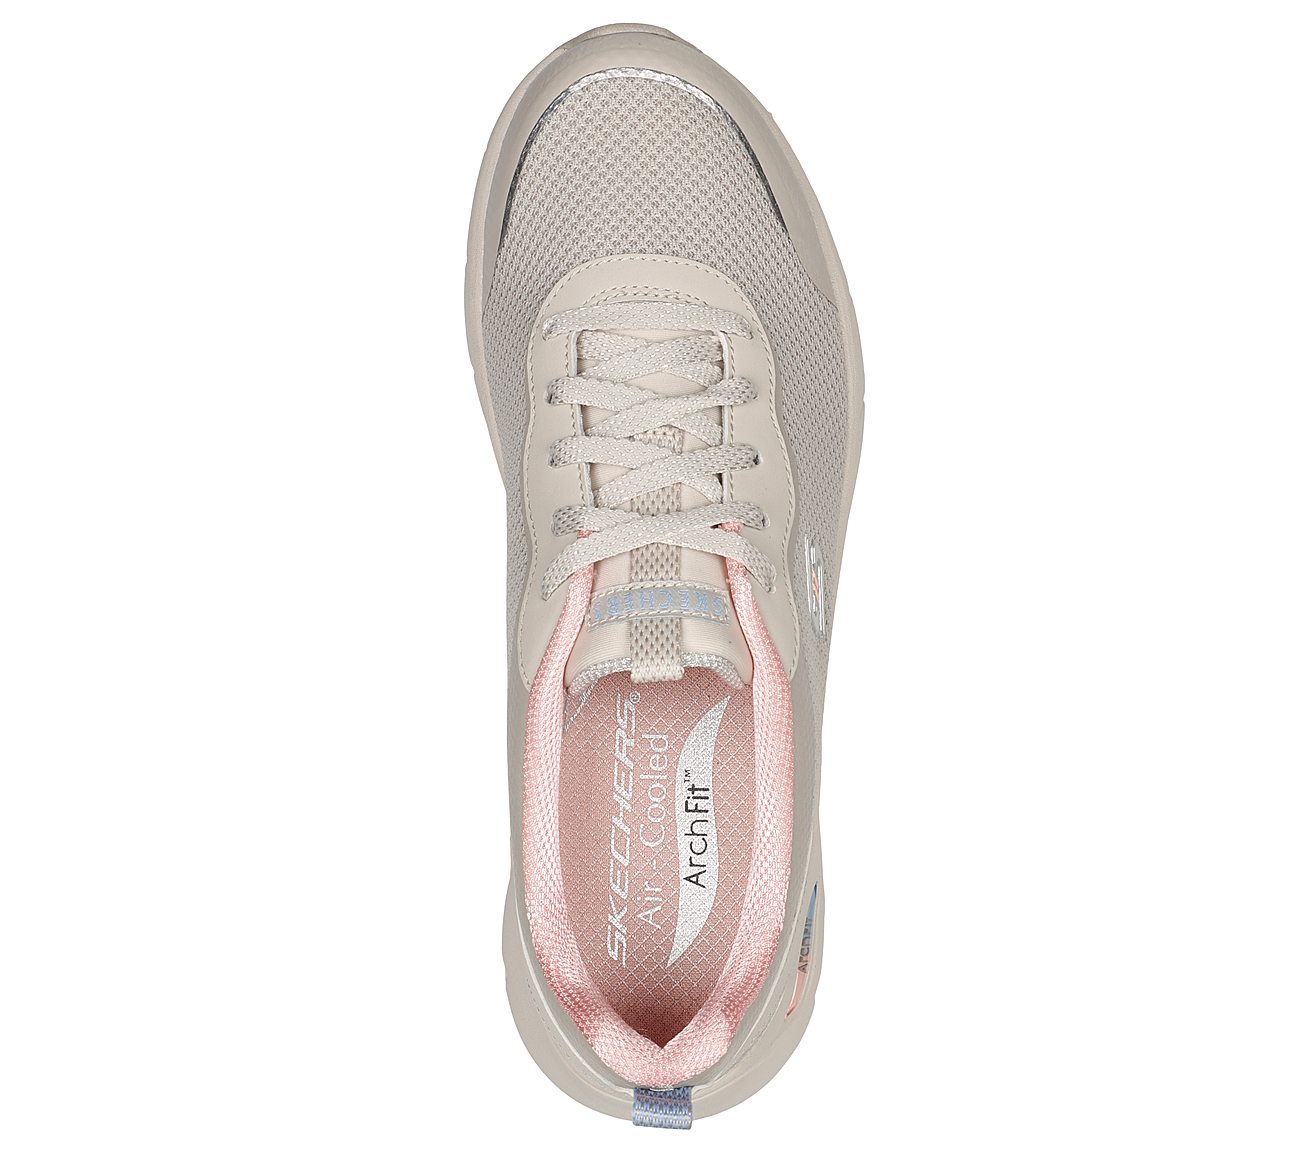 SKECH-AIR ARCH FIT - SOOTHING, TAUPE/PINK Footwear Top View